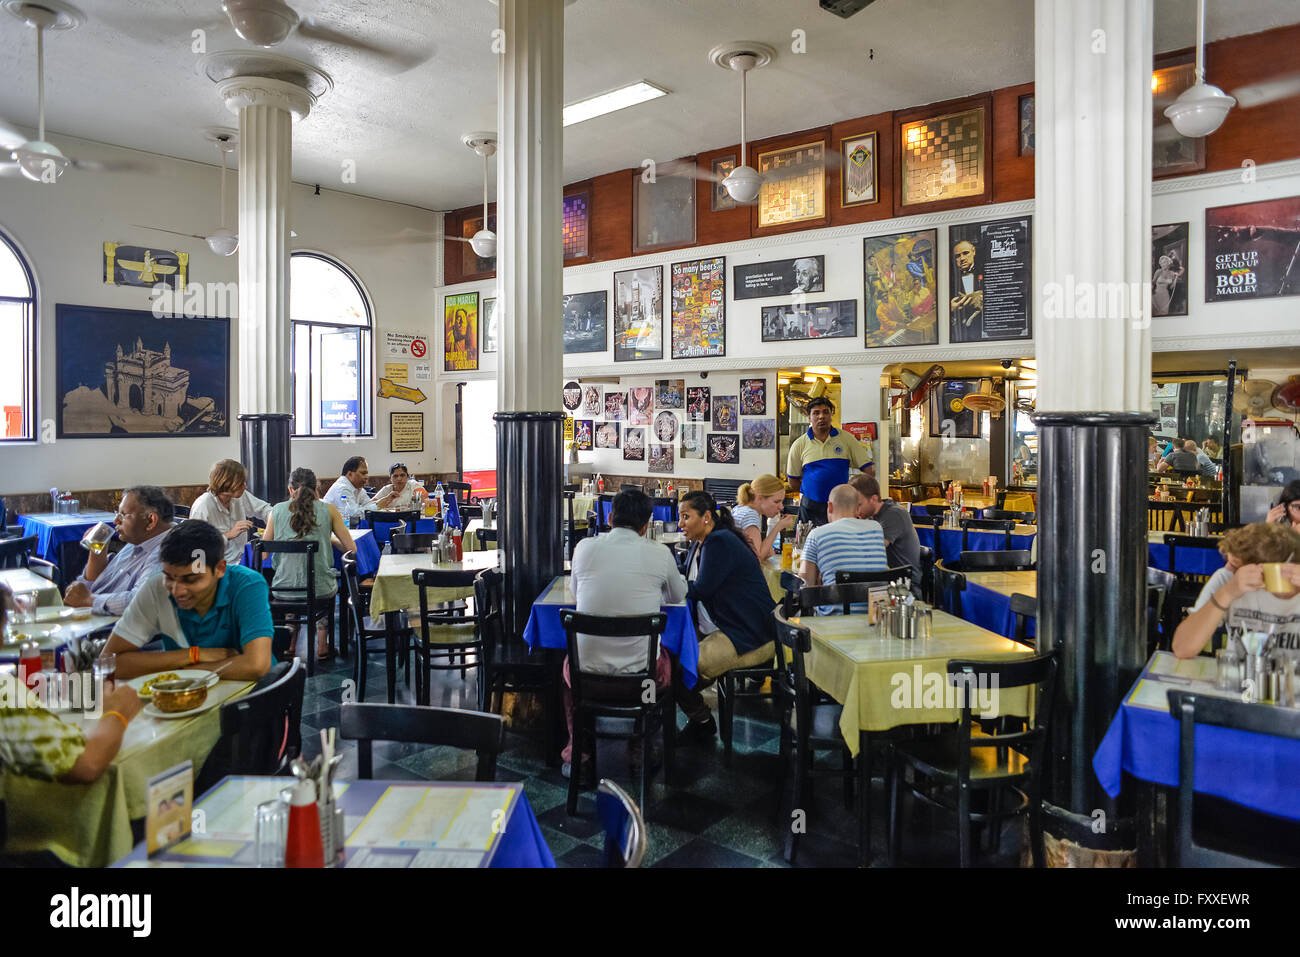 Leopold Cafe and Bar, Colaba